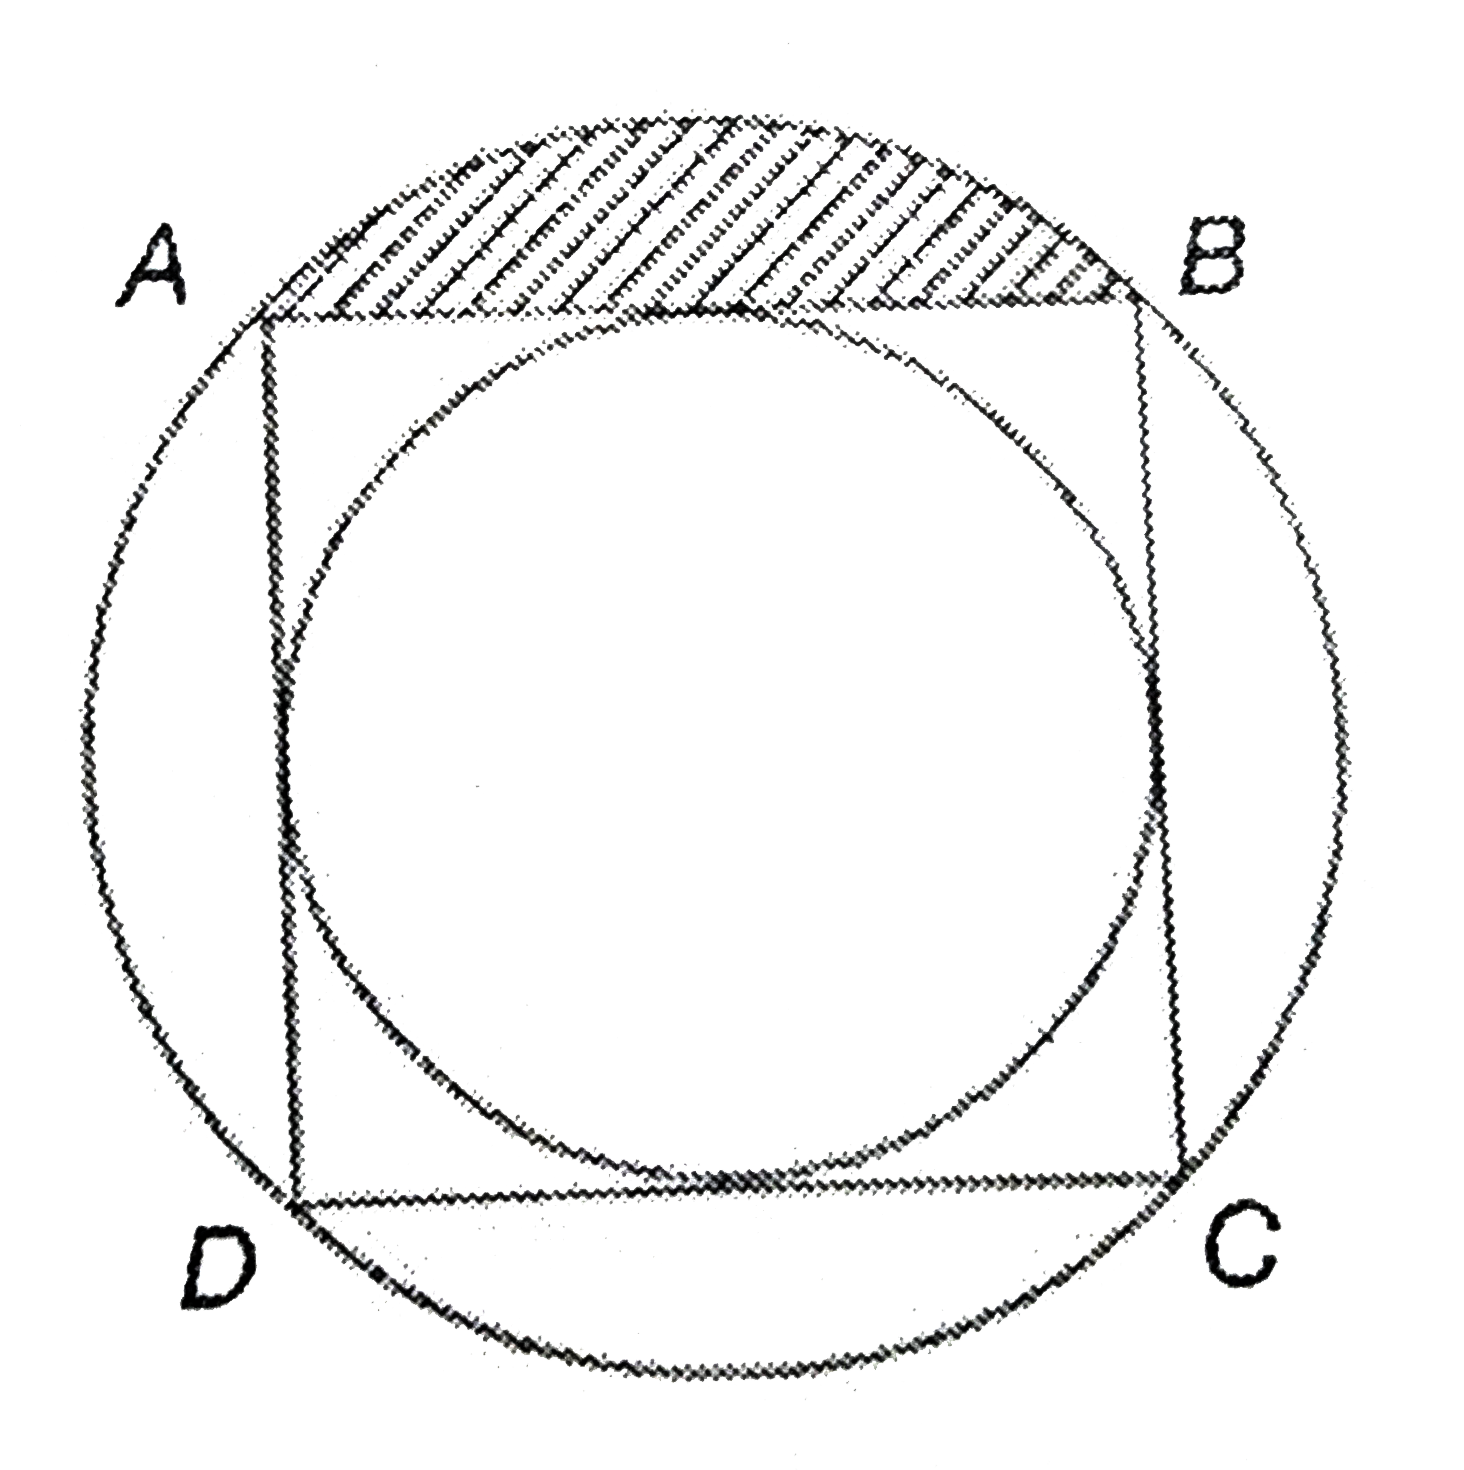 In the following figure, a circle a inscribed in square ABCD and the square is circusmscribed by a circle. If the radius of the smaller circle is  r cm, then find the area of the shaded region (in cm^(2)).